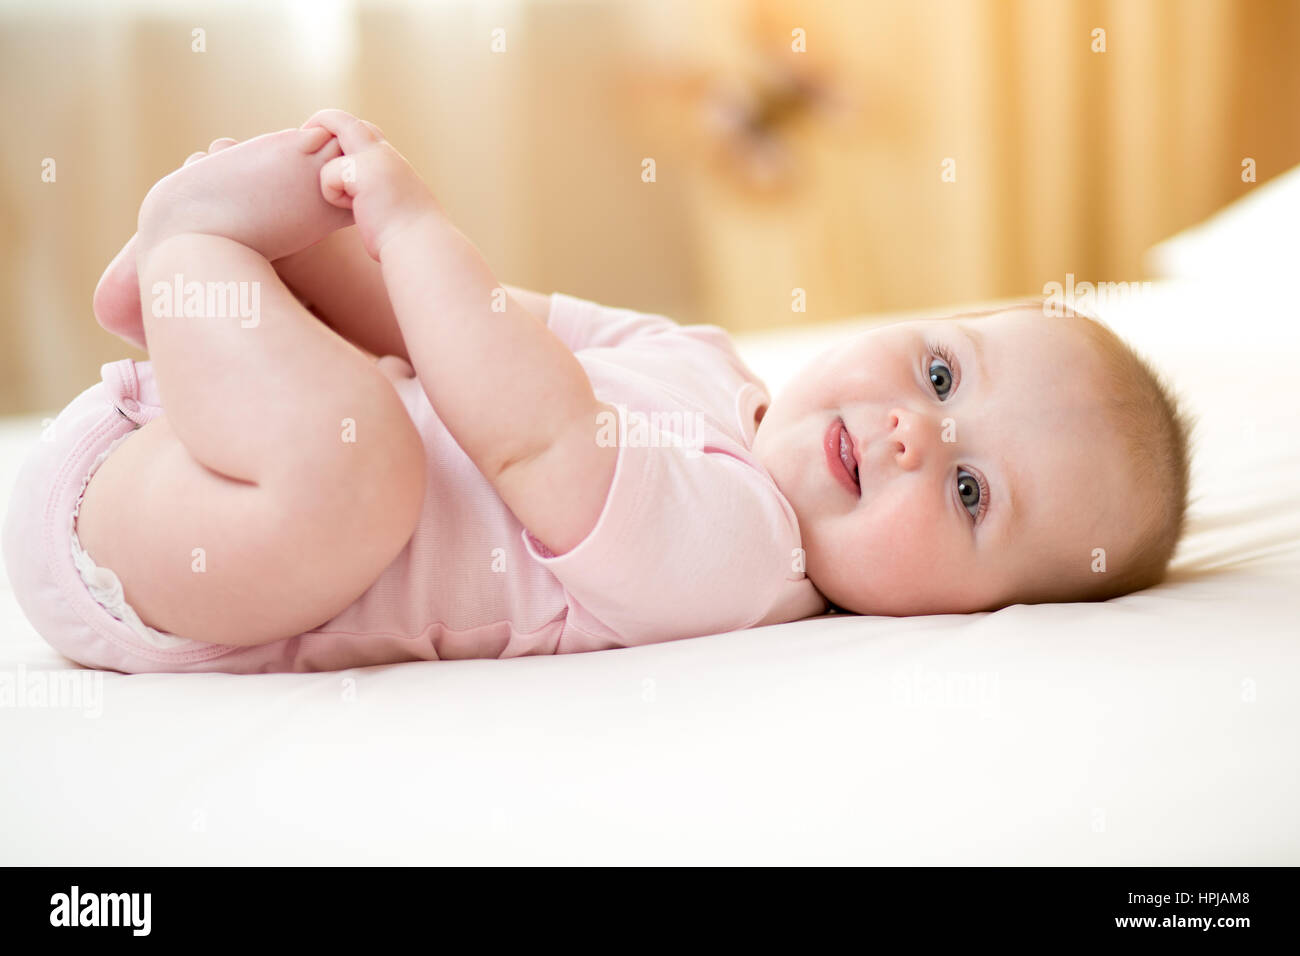 Funny smiling baby infant girl playing with her feet Stock Photo